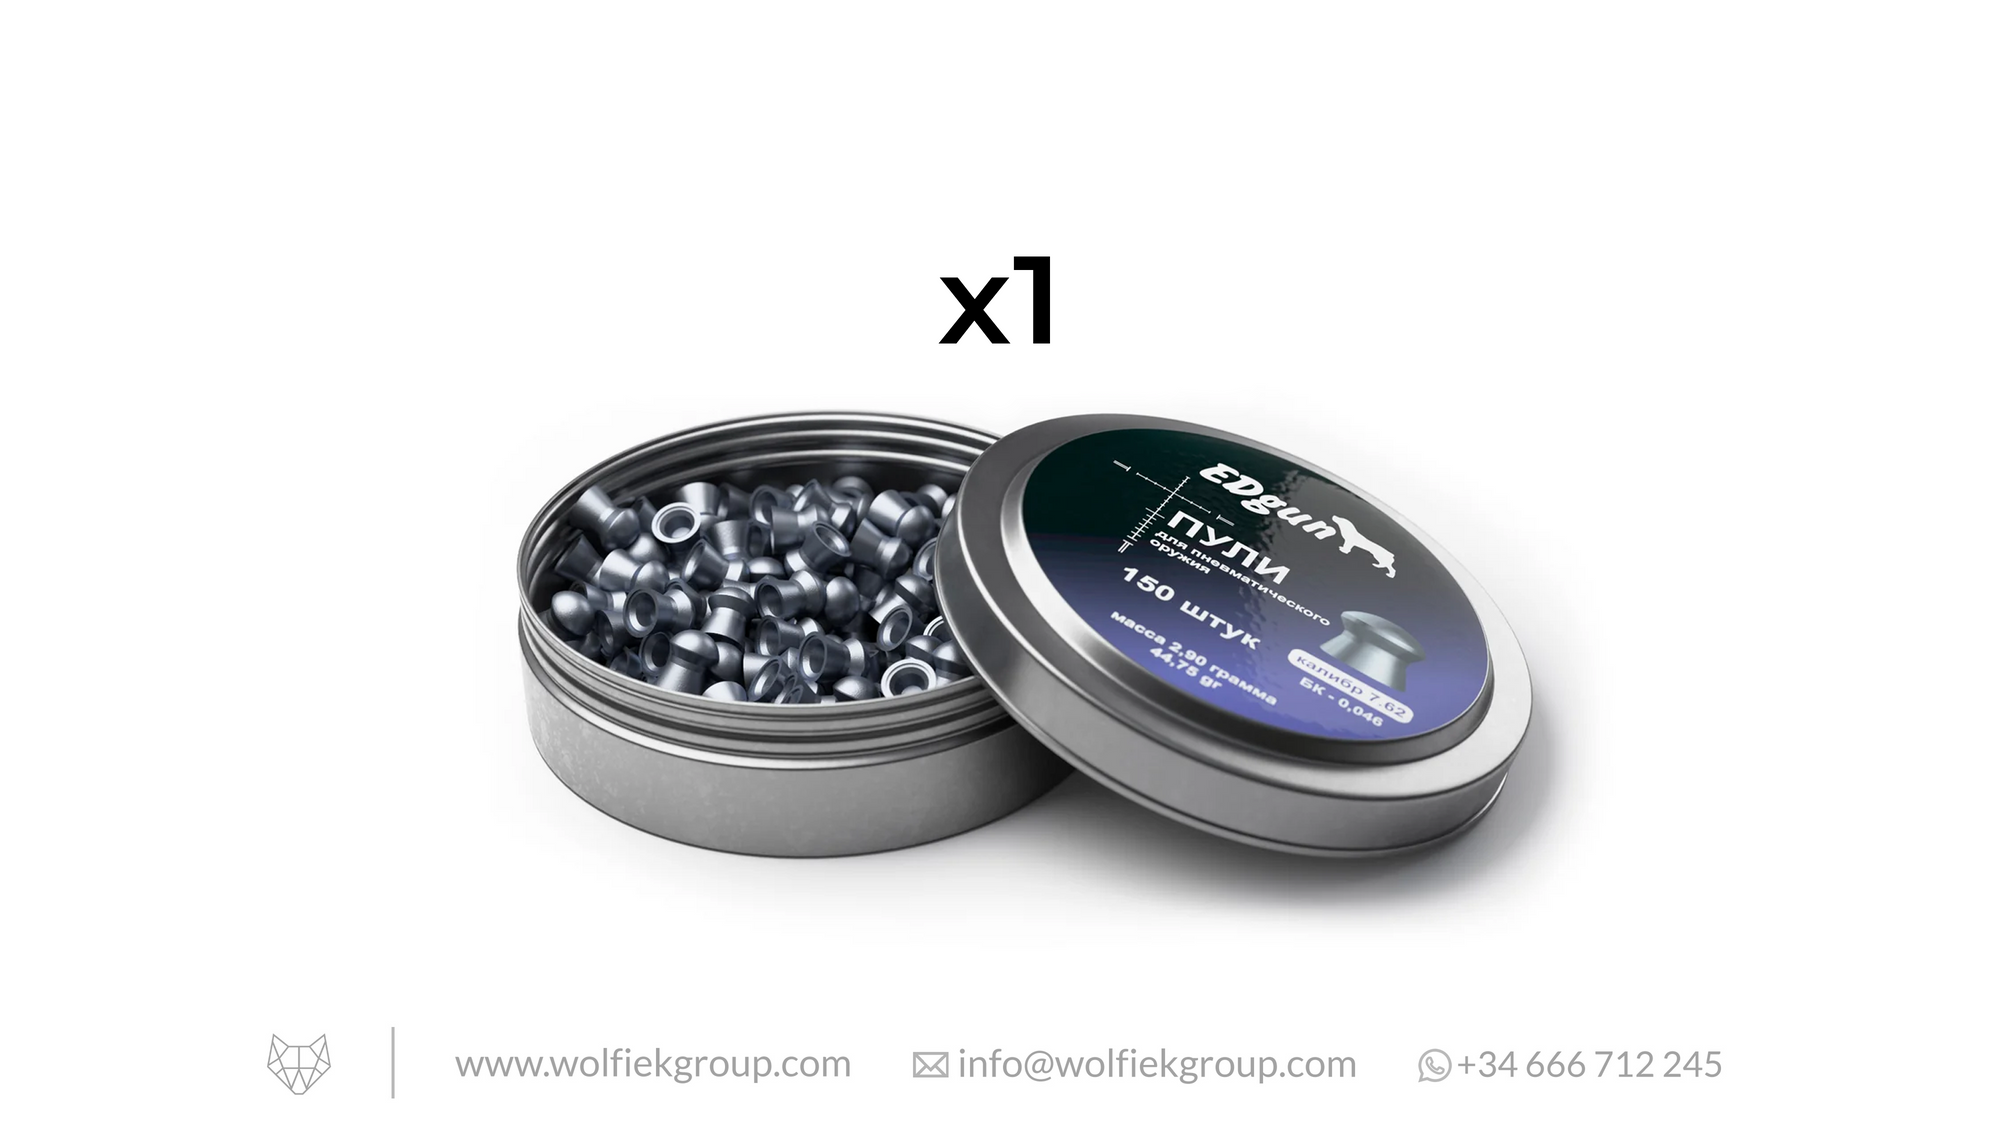 EDgun Premium Pellets Cal .30 (7,62mm) Weight: 2.9g (44,75gr) with text buy 4 get 1 for free